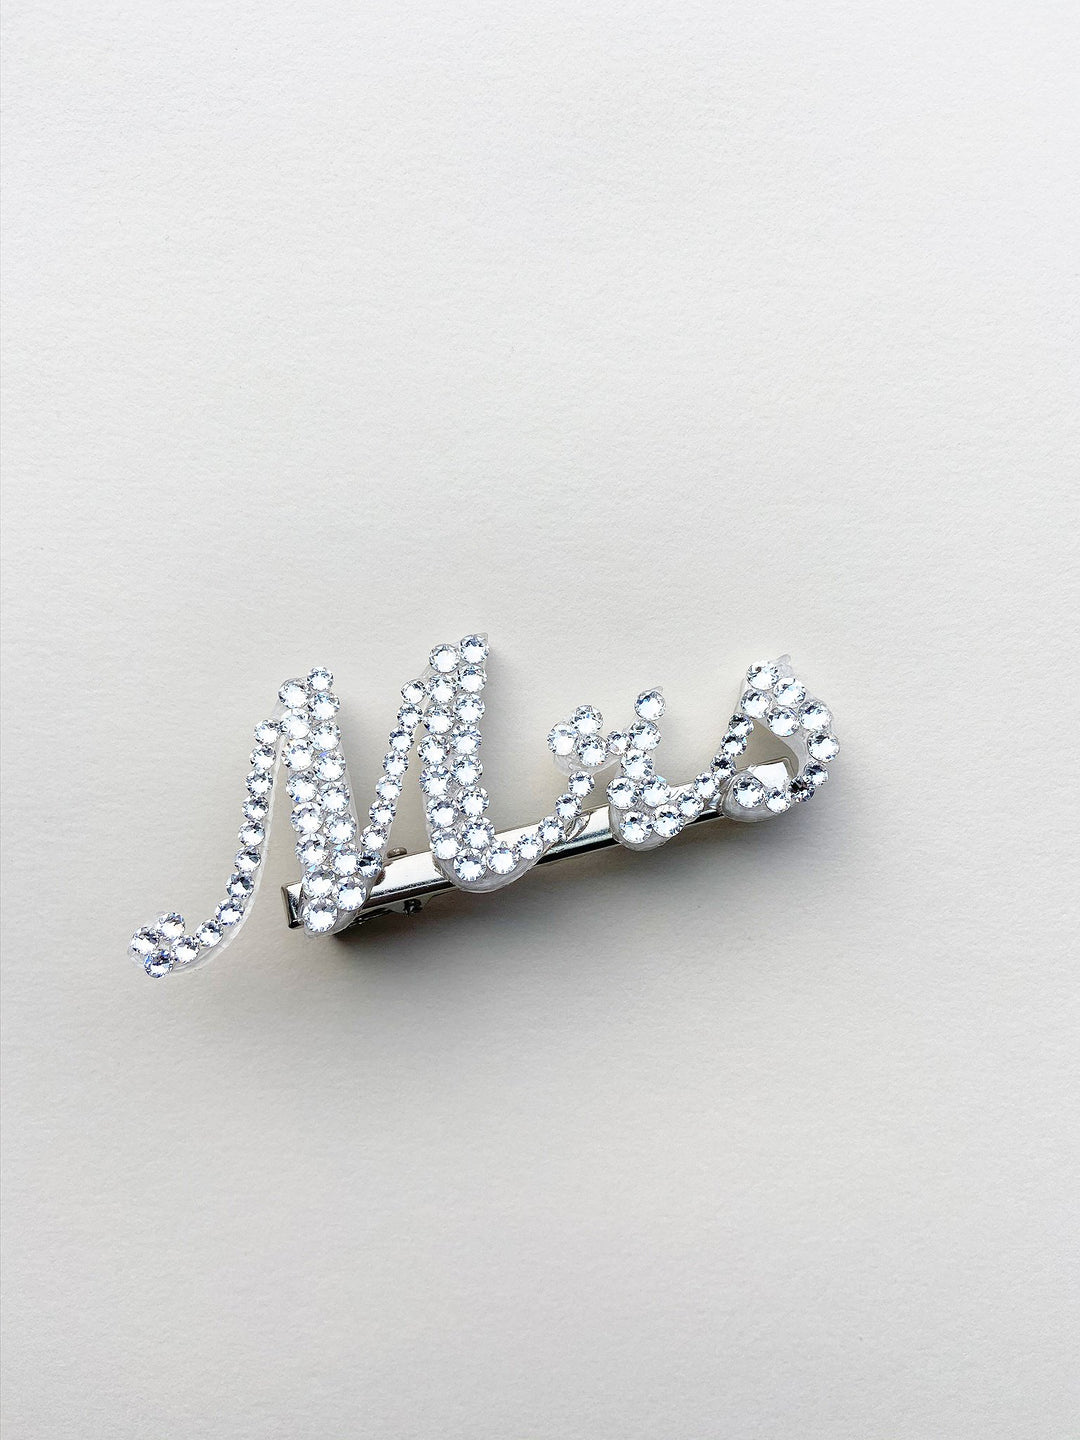 Mrs Hair Clip by Everly